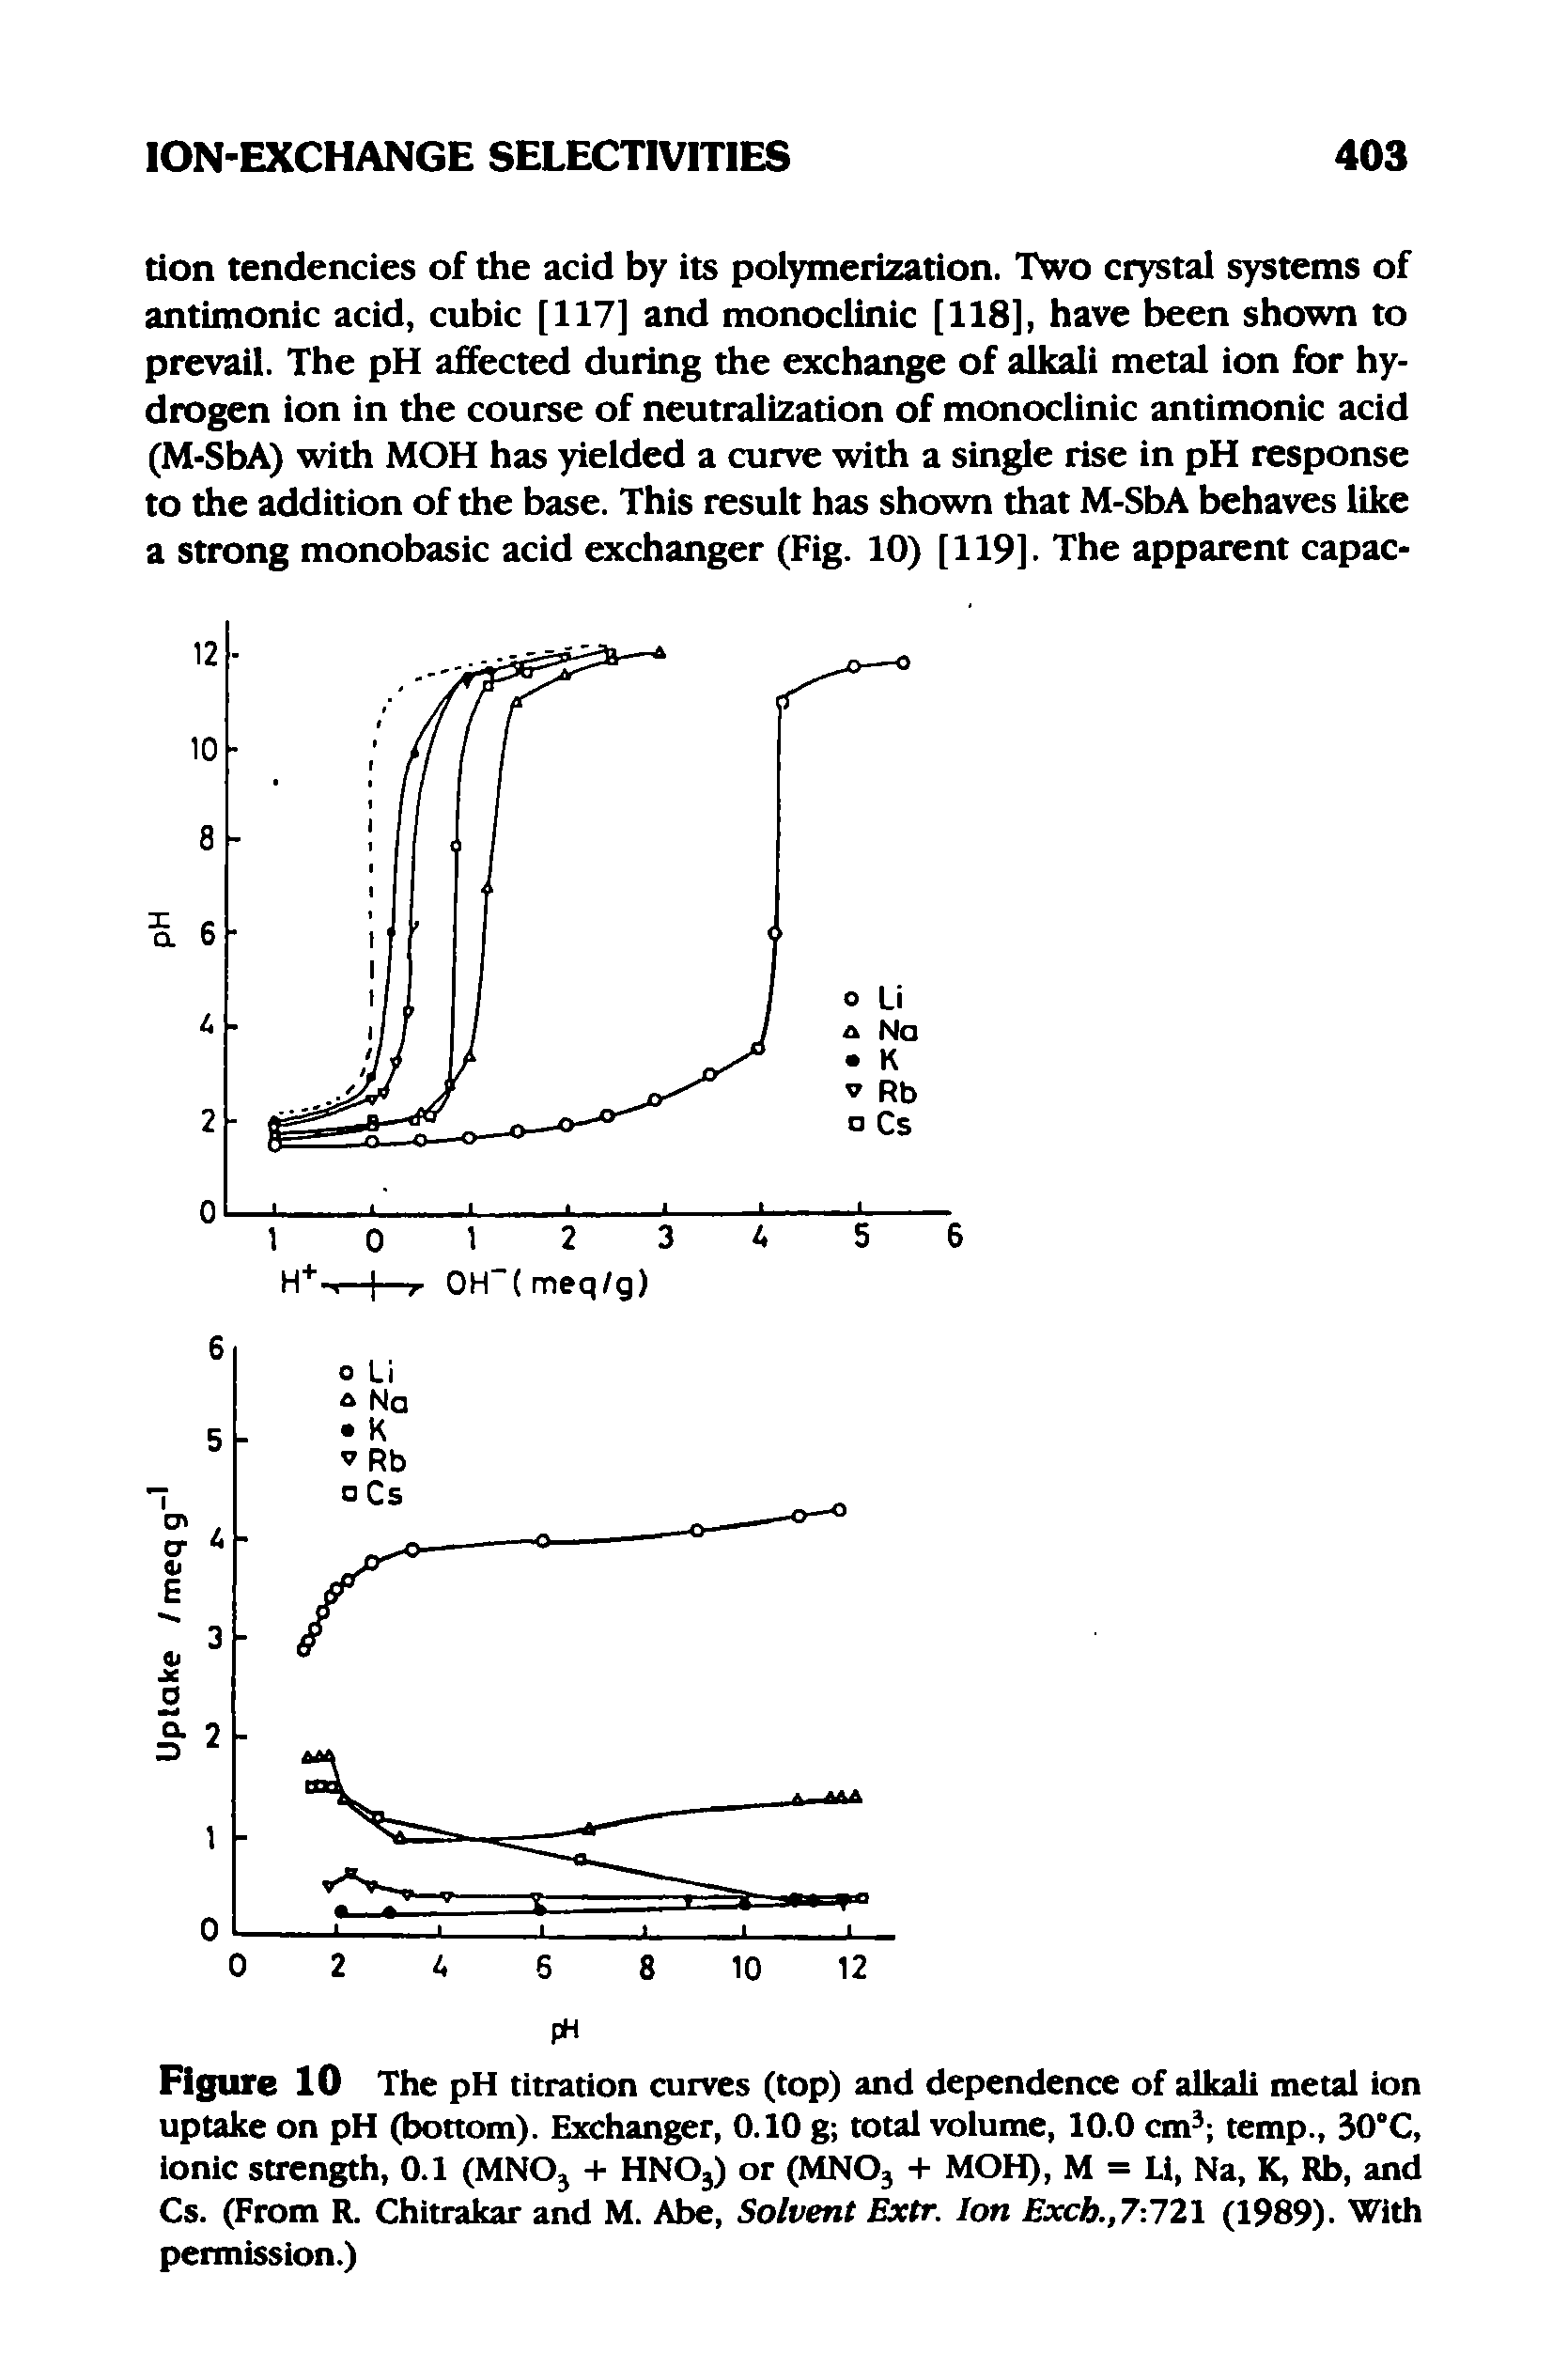 Figure 10 The pH titration curves (top) and dependence of alkali metal ion uptake on pH (bottom). Exchanger, 0.10 g total volume, 10.0 cm temp., 30°C, ionic strength, 0.1 (MNO3 + HNO3) or (MNO3 -I- MOH), M = Li, Na, K, Rb, and Cs. (From R. Chitrakar and M. Abe, Solvent Extr. Ion Excb.,7-n2 (1989). With permission.)...